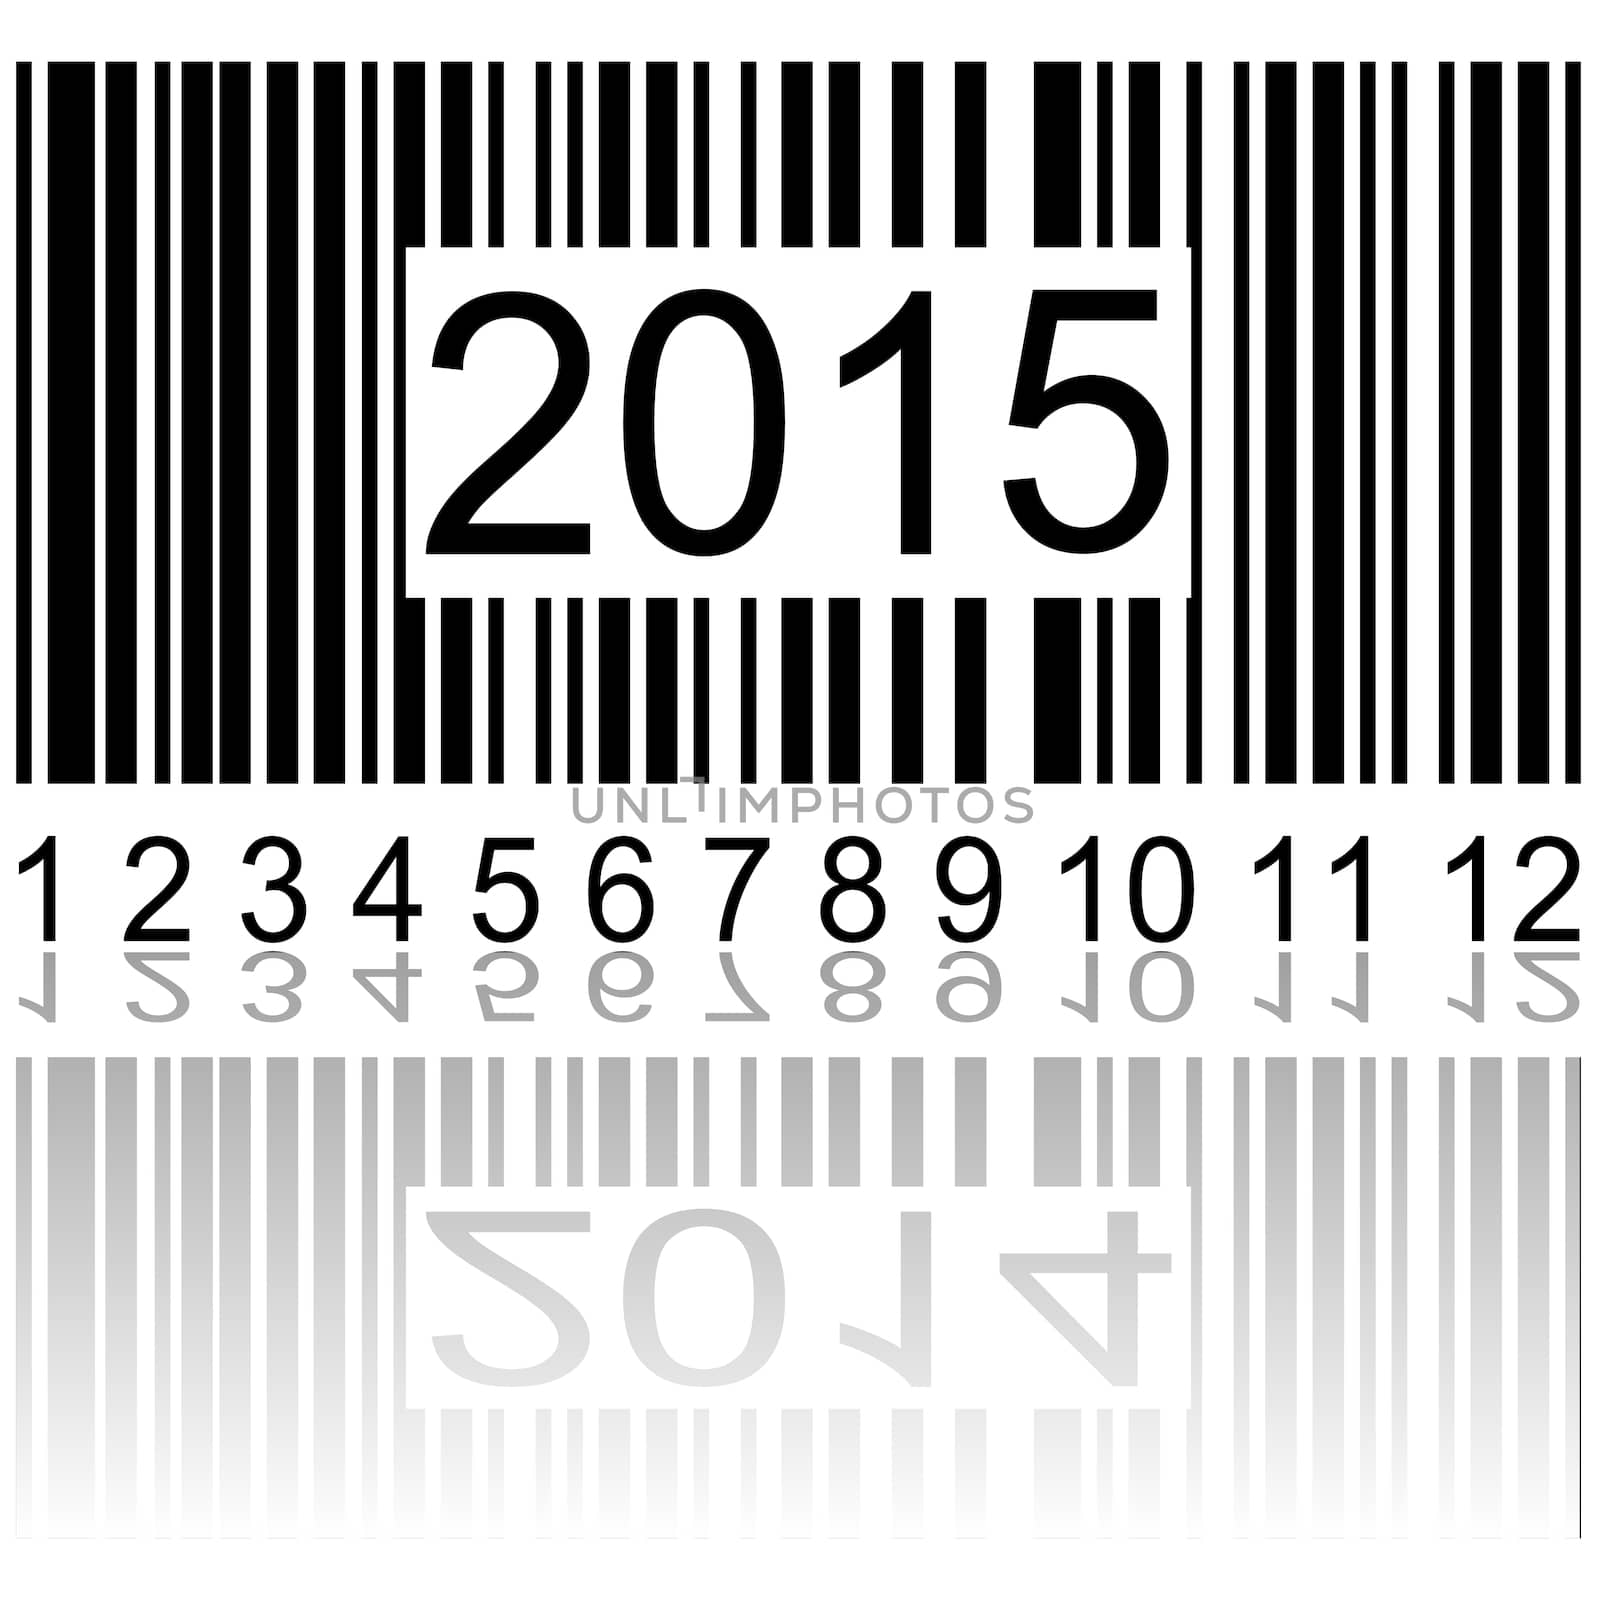 2015 new year on the barcode, vector illustration